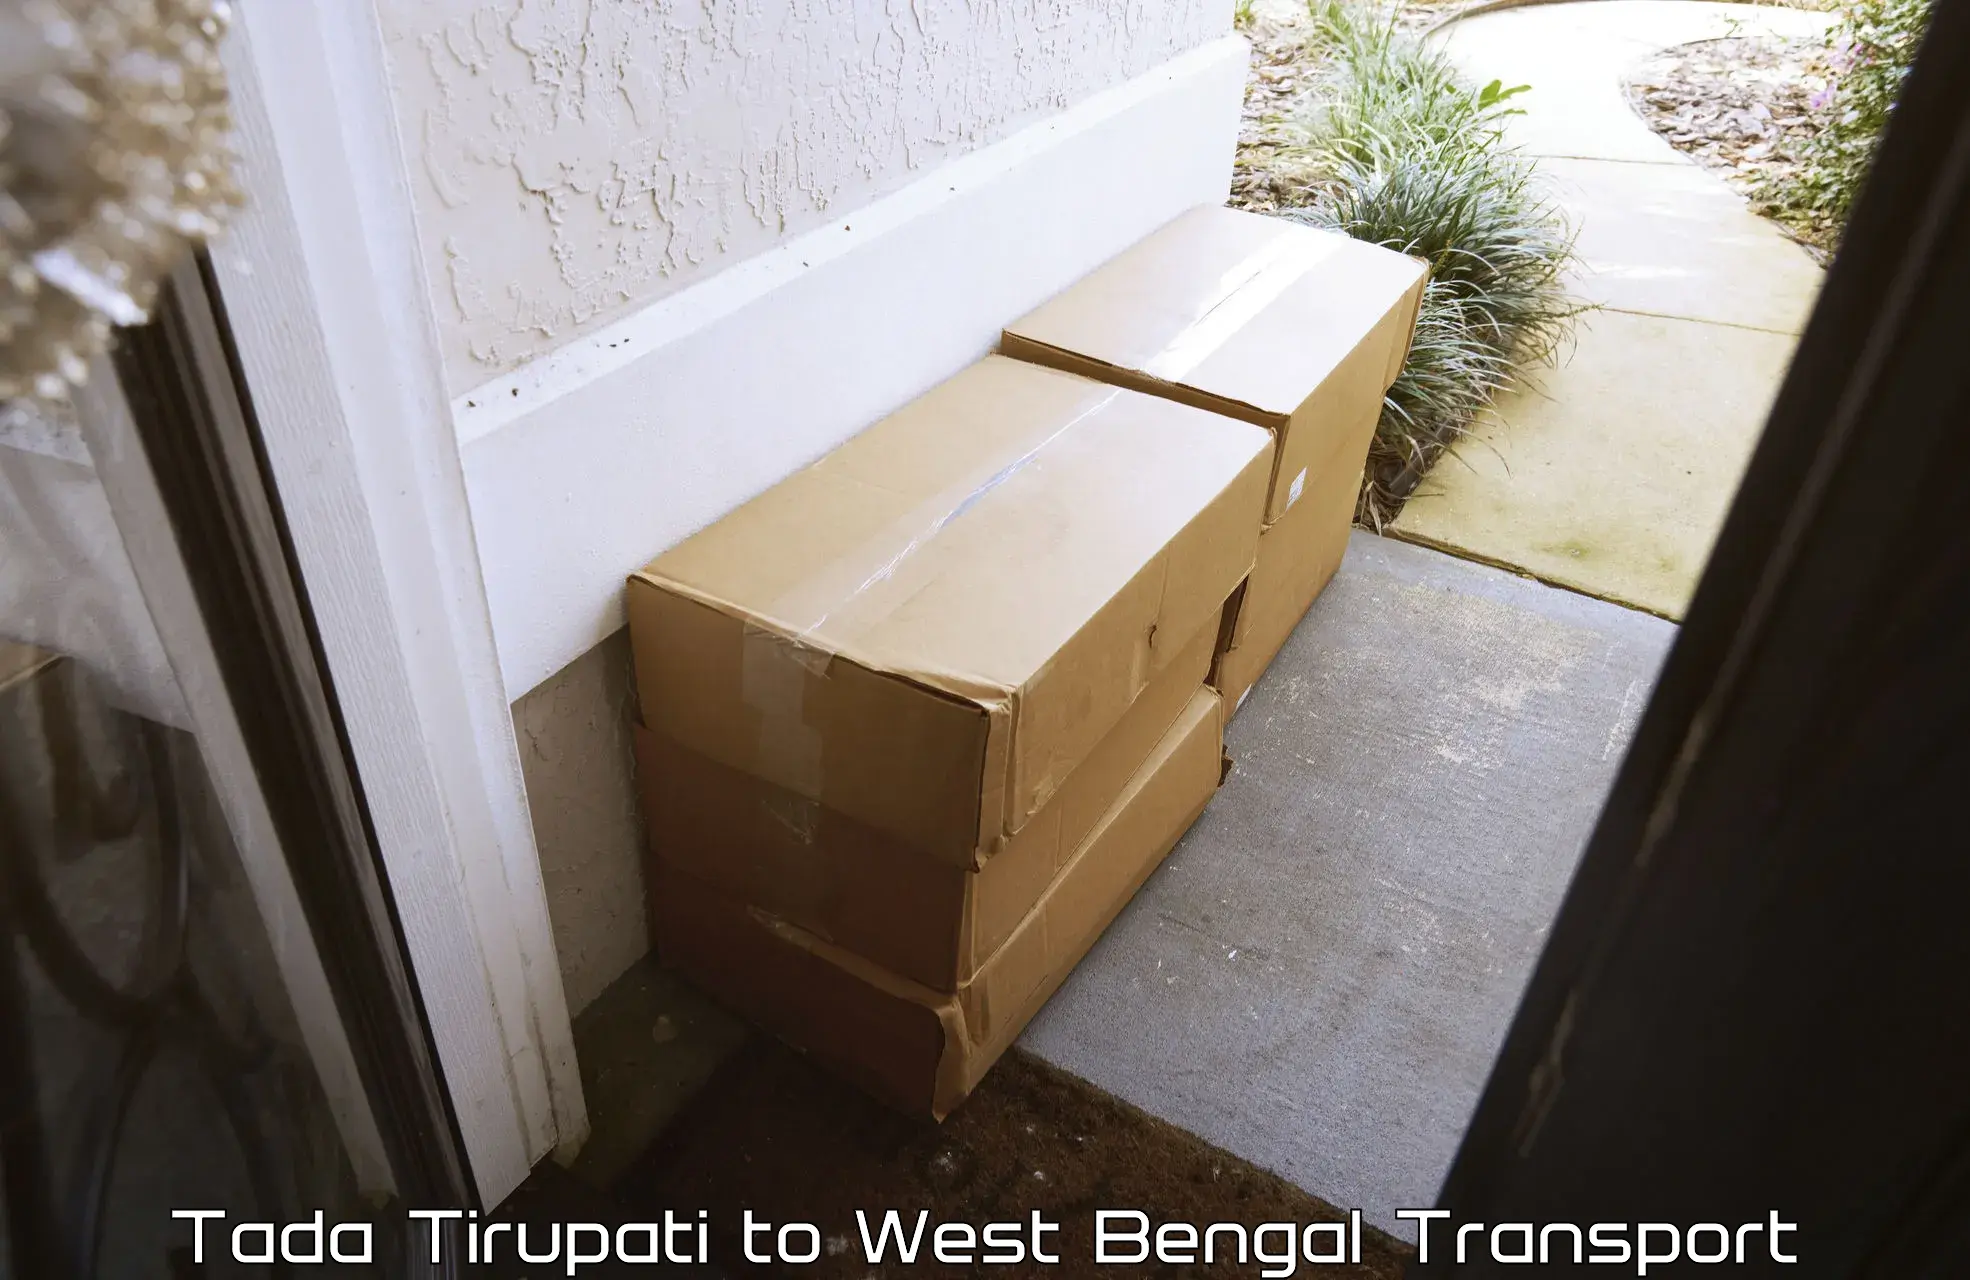 Goods delivery service Tada Tirupati to West Bengal